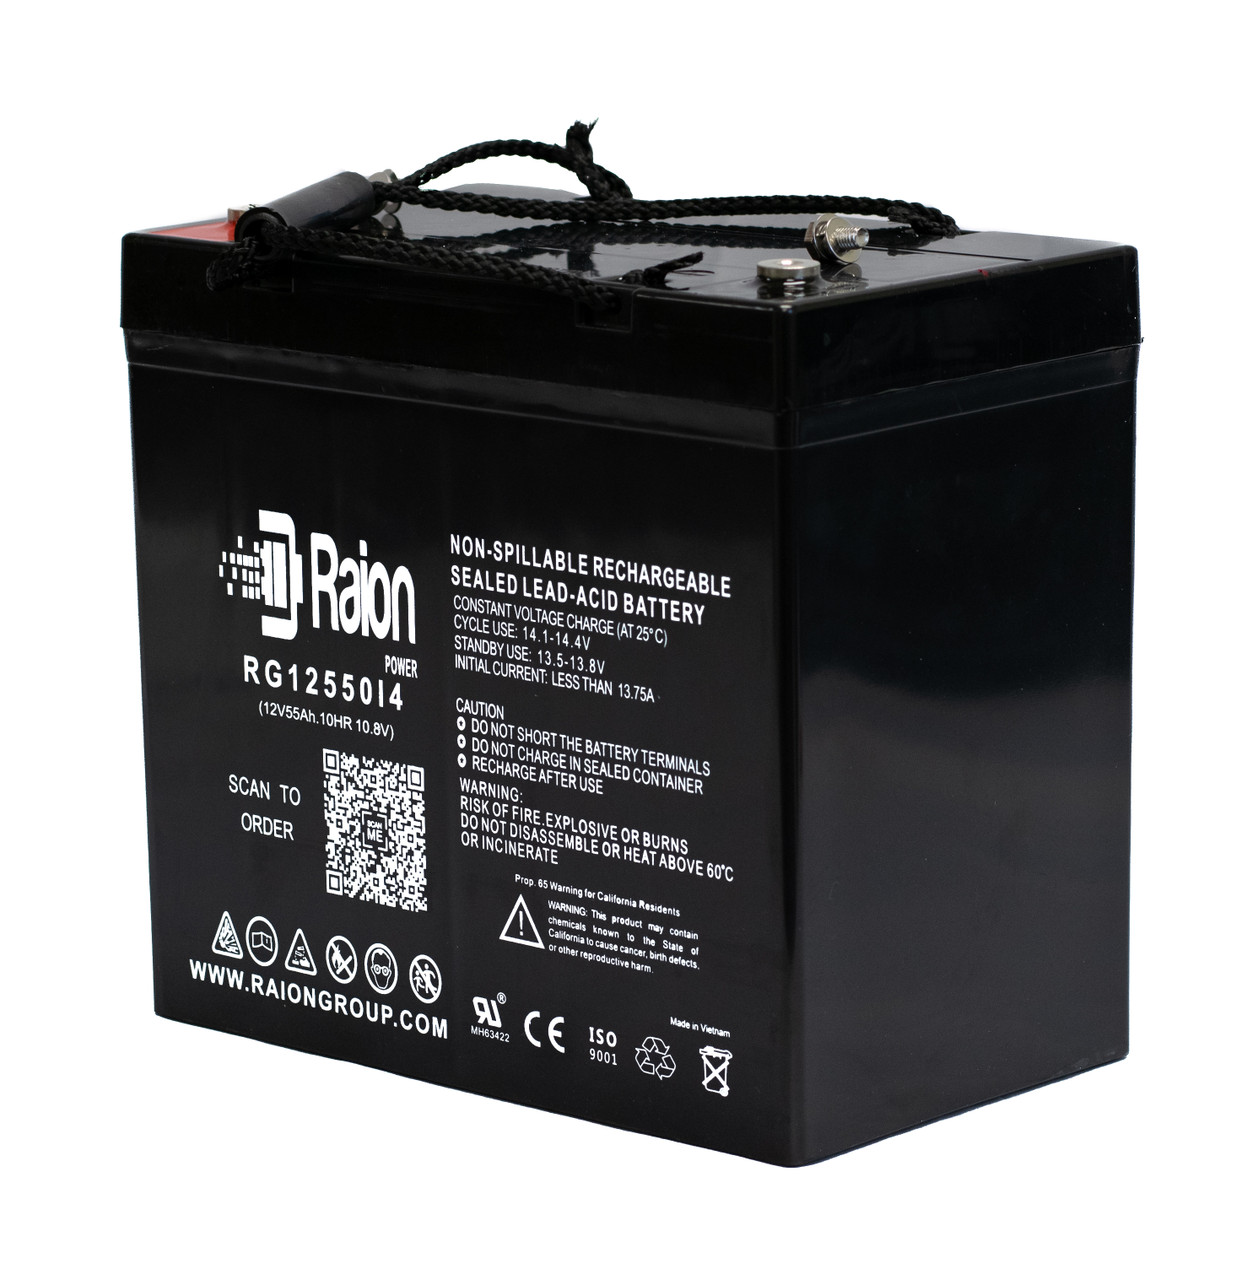 Raion Power 12V 55Ah 22NF Mobility Scooter Battery Replacement for Fortress Scooters 1600ACV